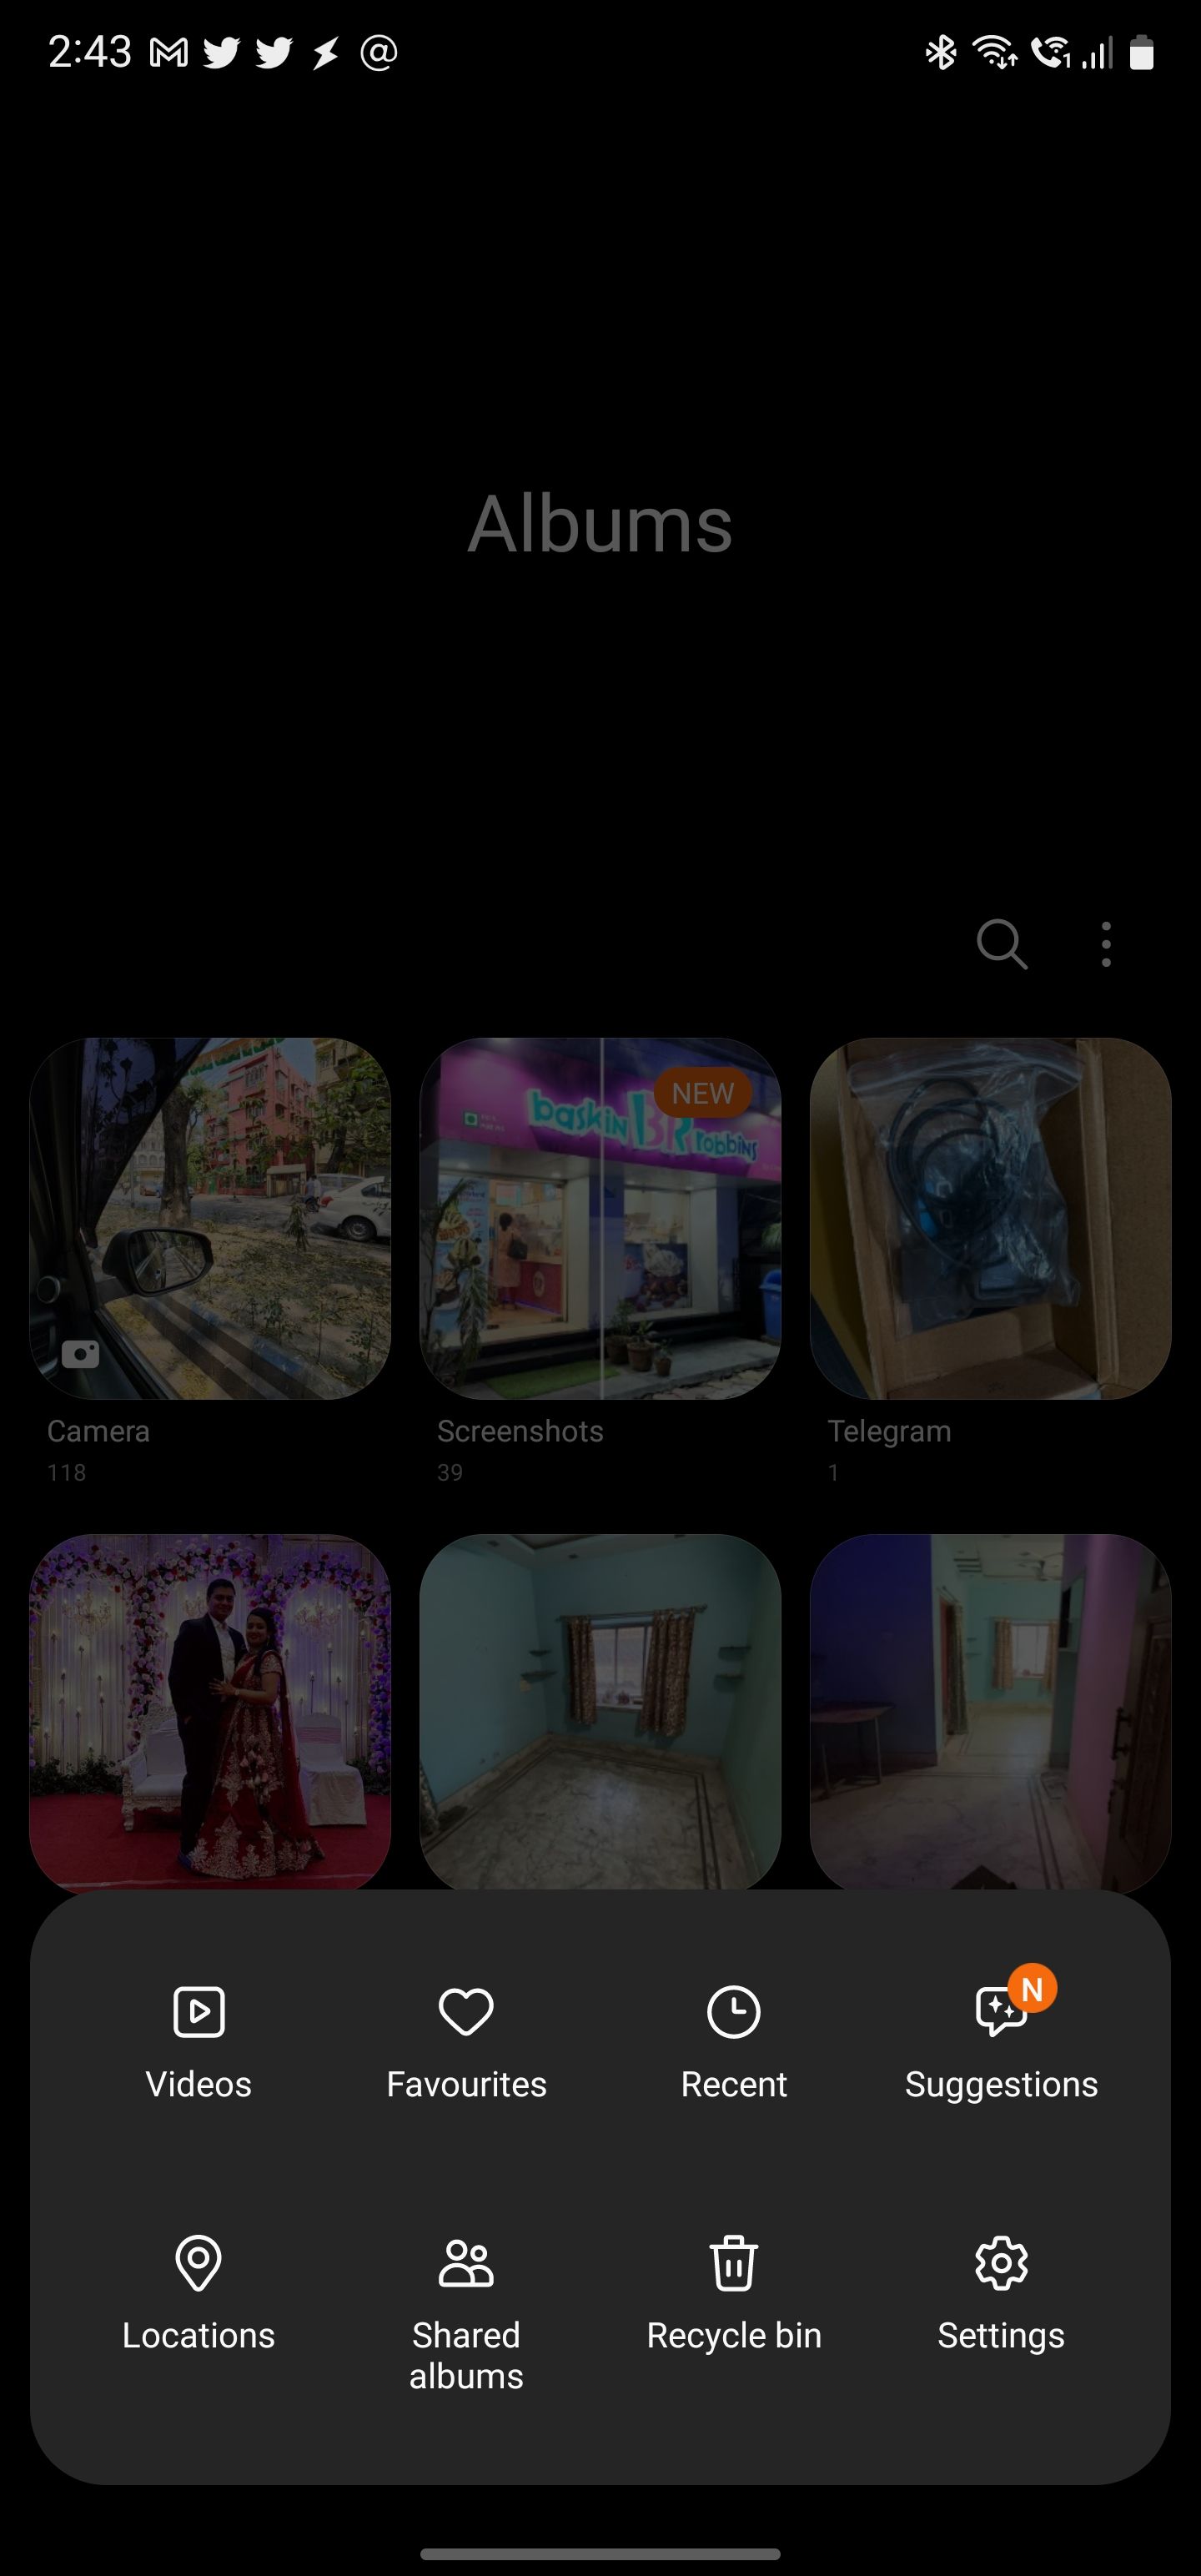 The settings in the Samsung Gallery app with some suggestions available 